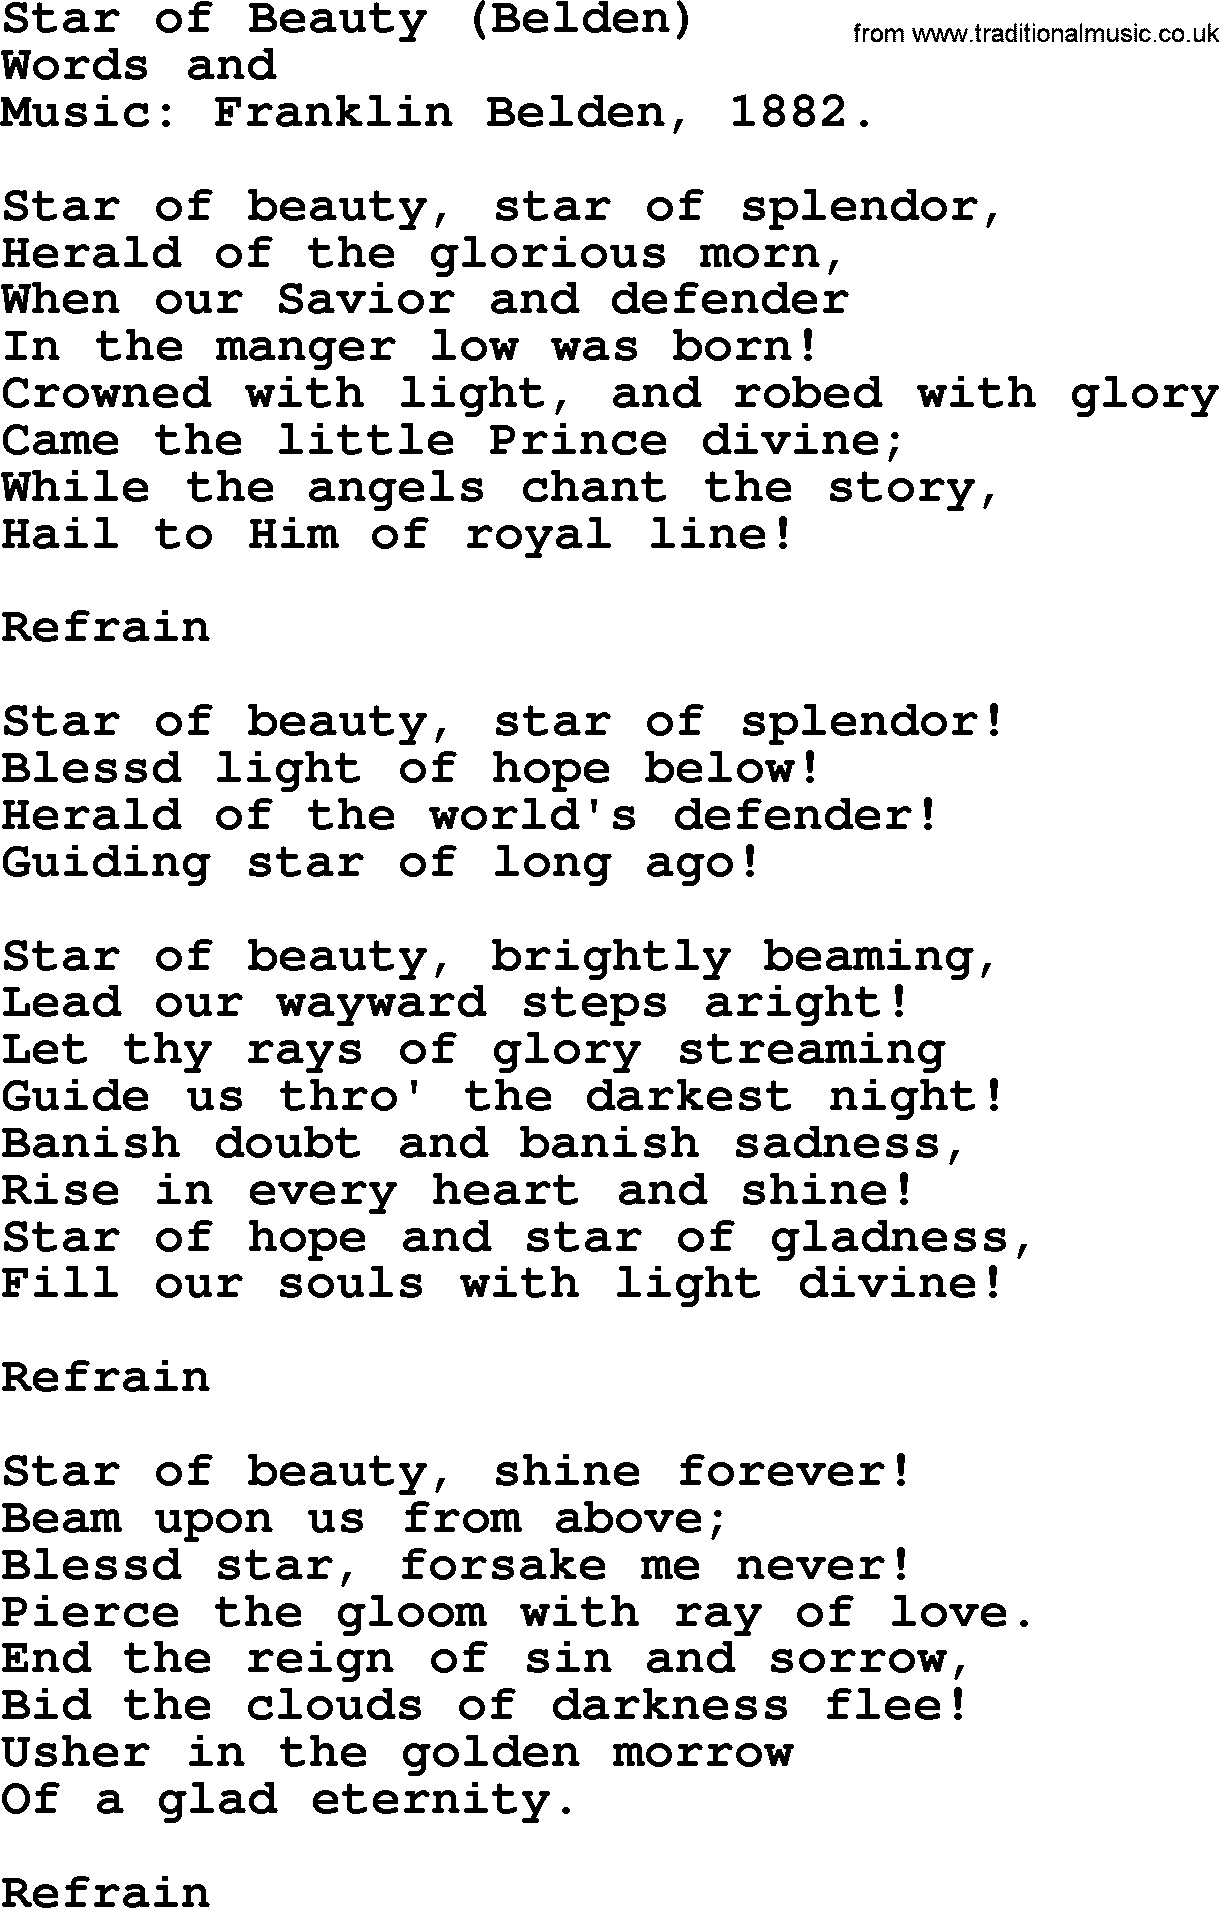 Christmas Hymns, Carols and Songs, title: Star Of Beauty (belden), lyrics with PDF